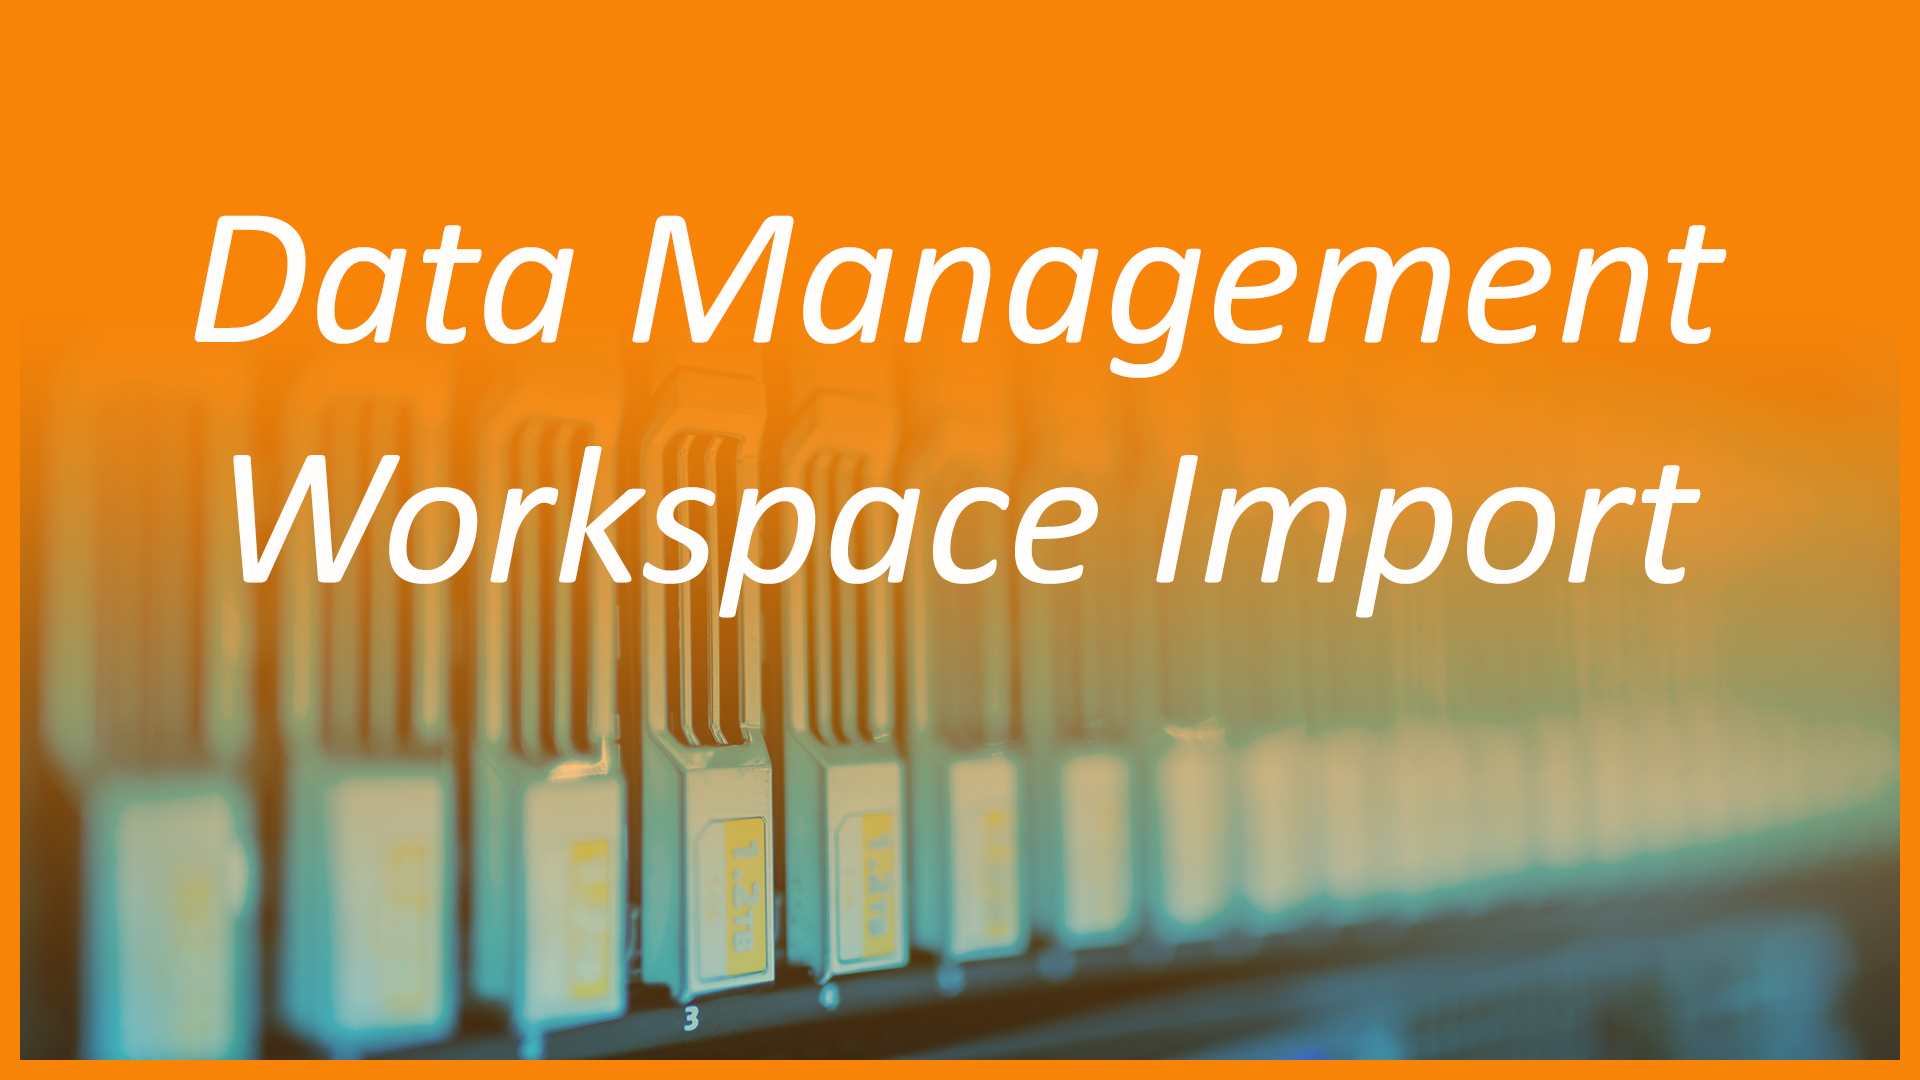 You are currently viewing Data Management work space Import in Dynamics 365 Finance and Operations